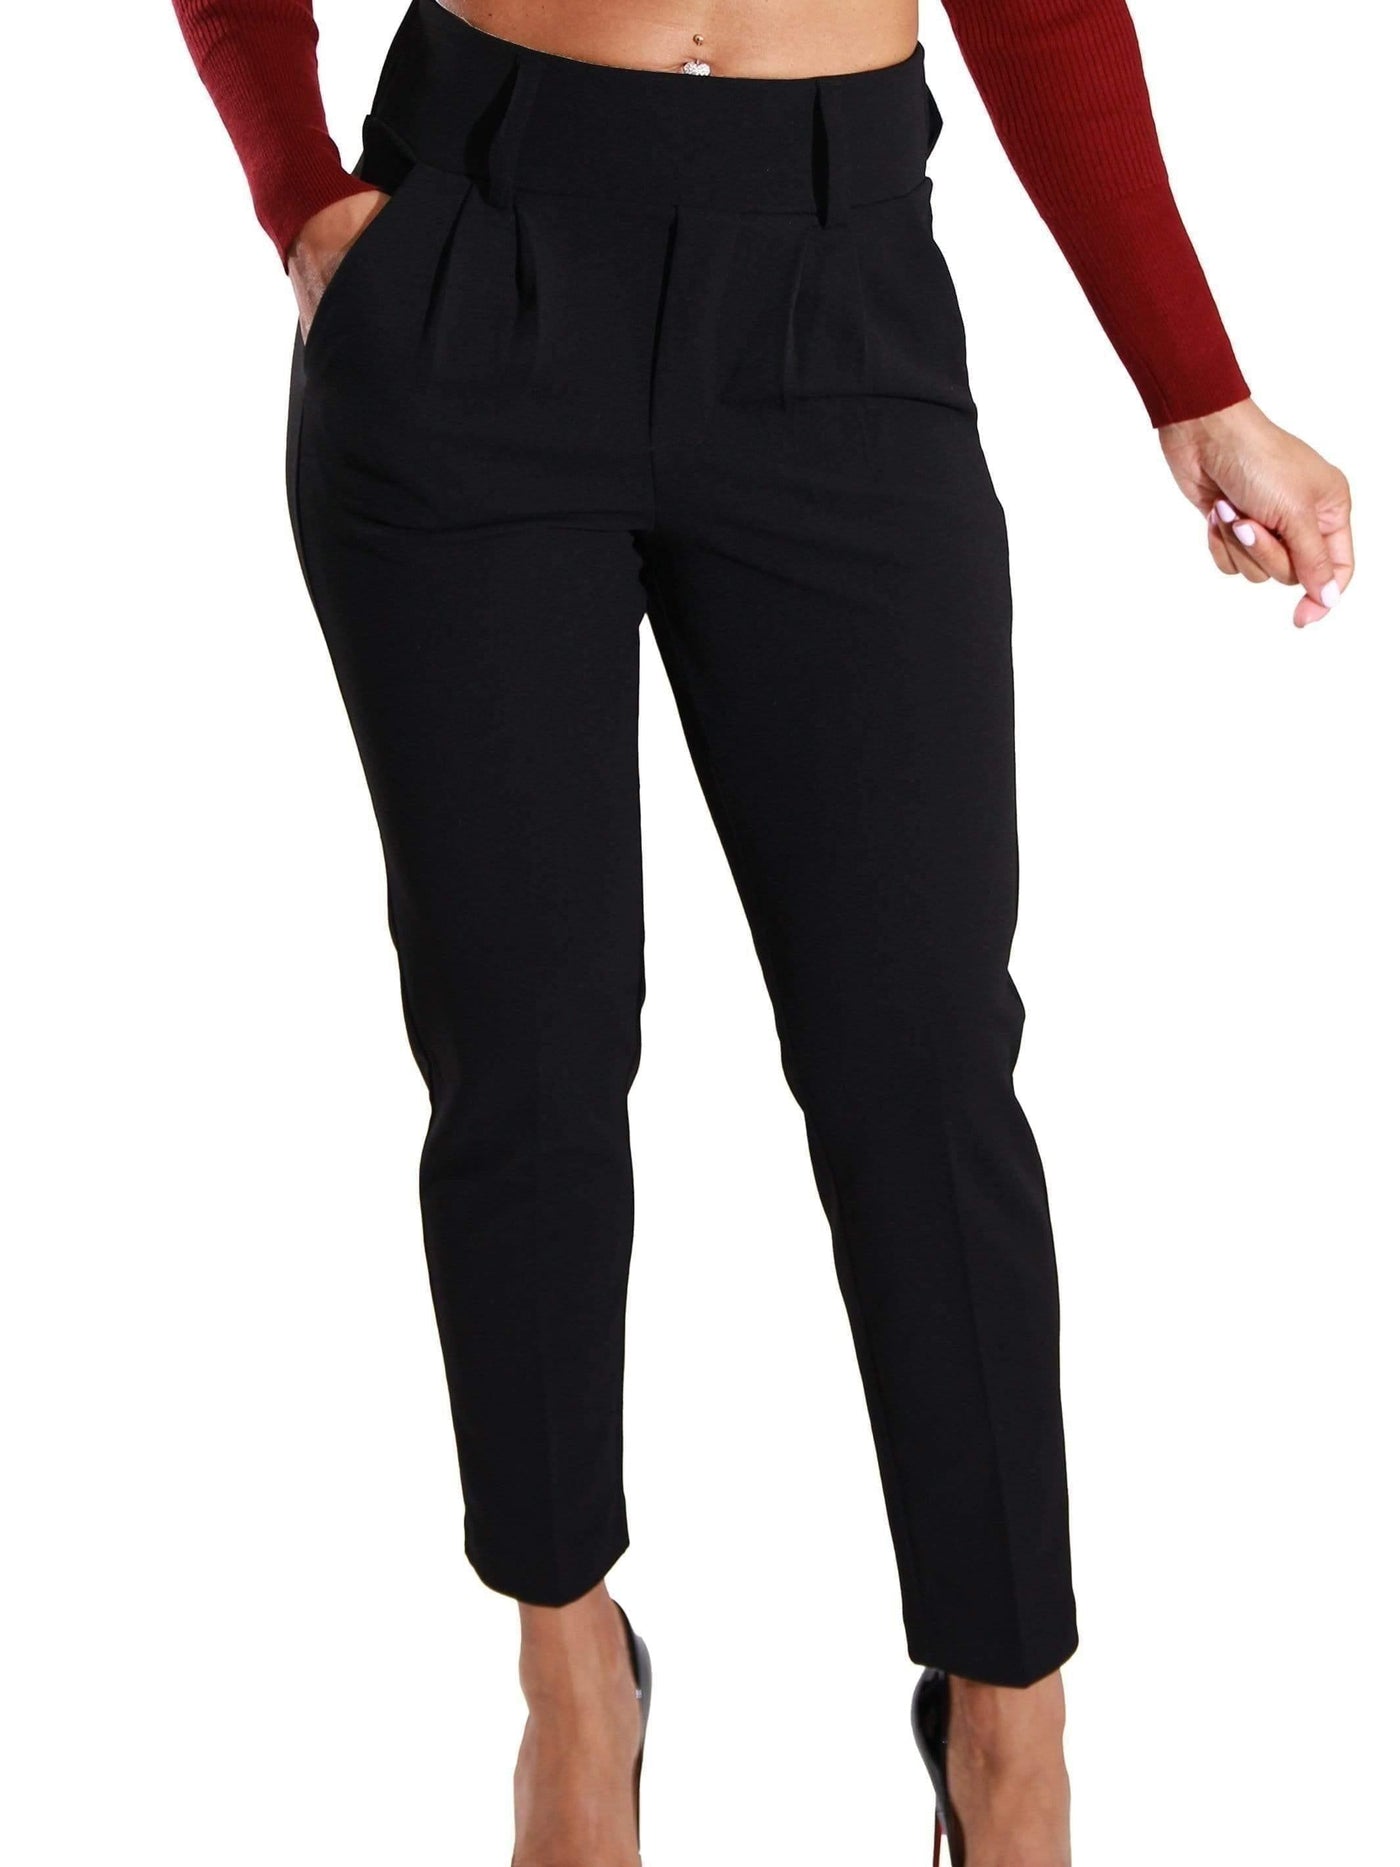 Works Tale | High Waisted Trousers SIZE SMALL - Statement Piece NY _tab_size-chart, Black, Bottoms, Brooklyn Boutique, casual, clearance, Fall, Fall Fashion, final, final sale, High Waisted, high waisted pants, Last One, Long Pants, Misses, Monochrome, pants, Ships from USA, Skinny Fit, SPNY Exclusive, Standard Fall, statement, statement bottoms, statement piece, Statement Piece Boutique, statement piece ny, Statement Pieces, Statement Pieces Boutique, Women's Boutique, work wear, Workwear Statement Bottoms